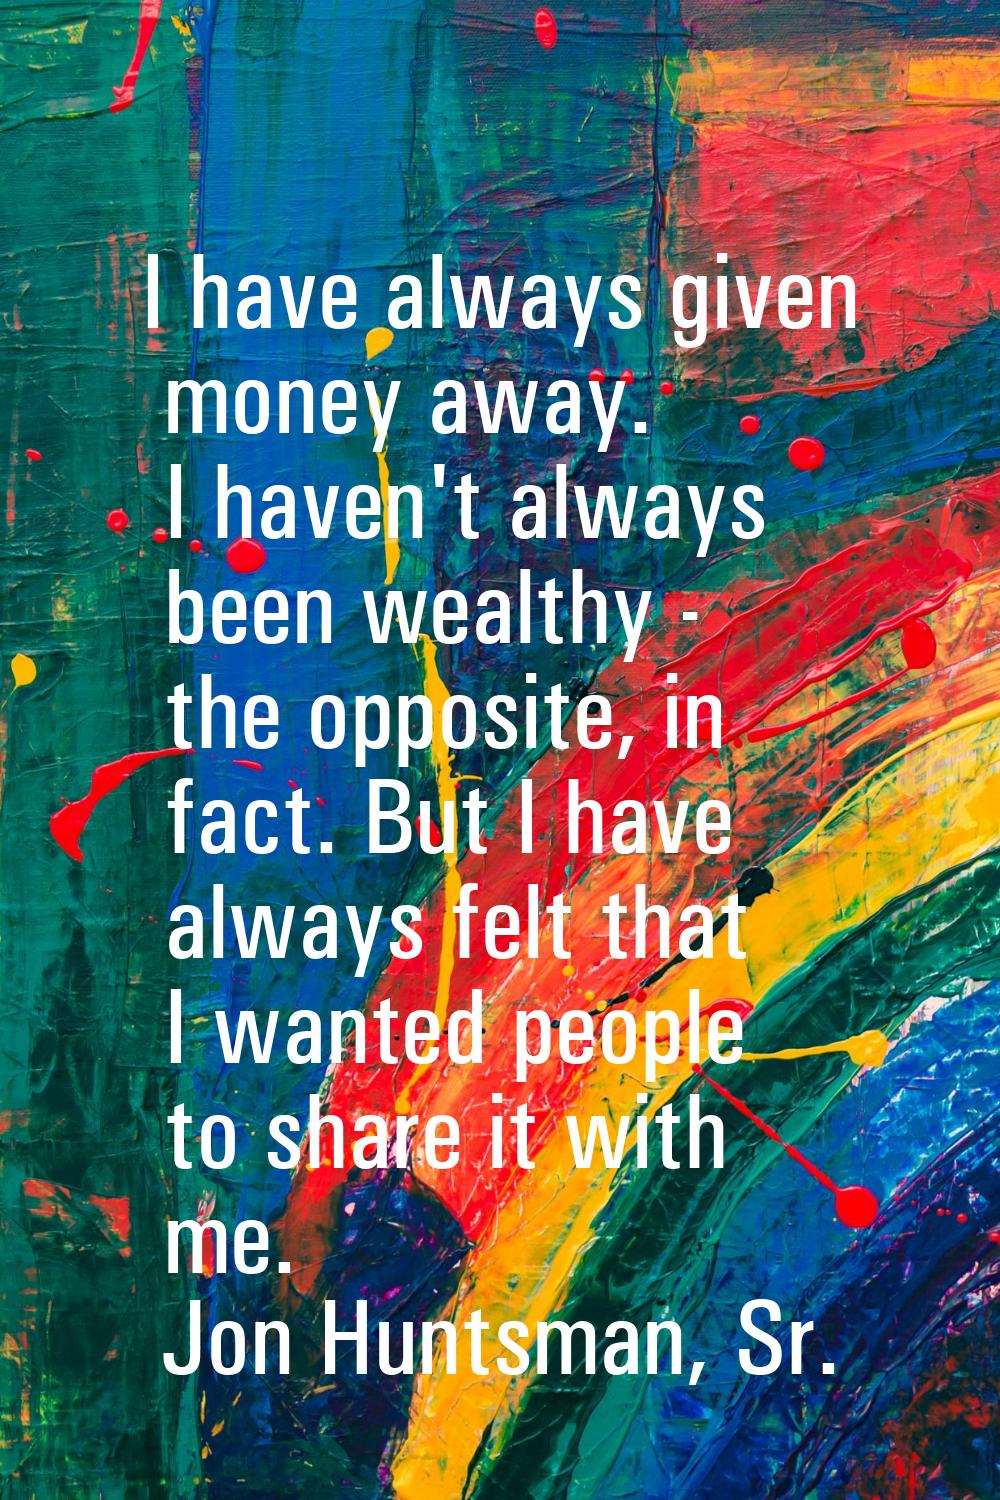 I have always given money away. I haven't always been wealthy - the opposite, in fact. But I have a